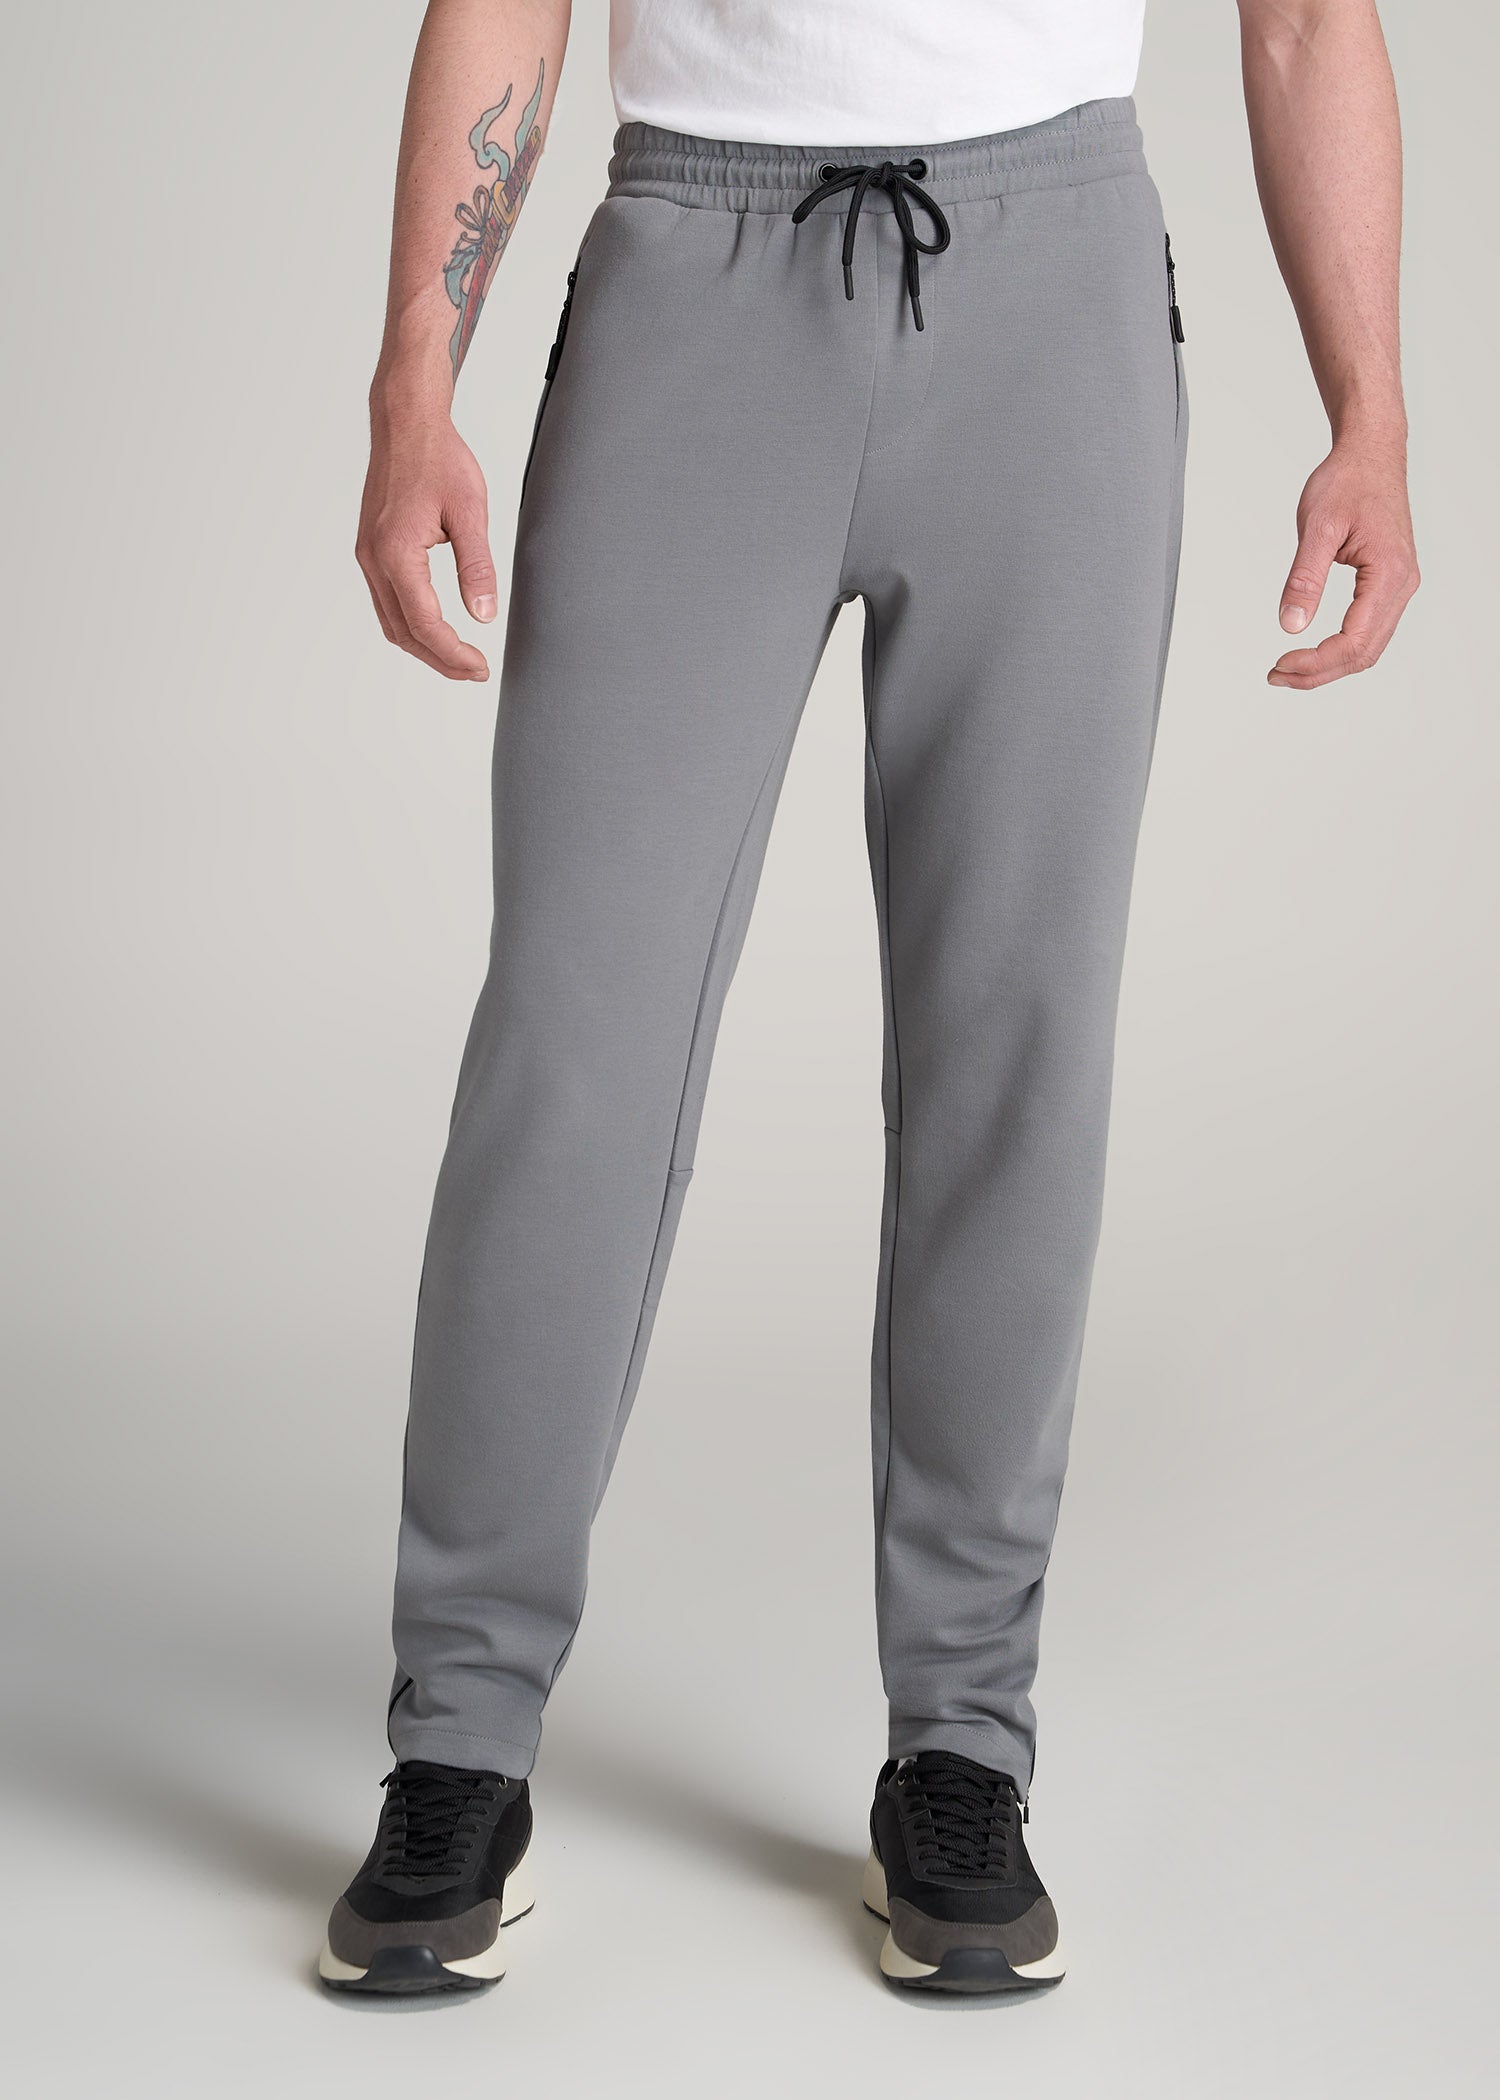    American-Tall-Men-Athleisure-Performance-Pant-Fossil-Grey-front